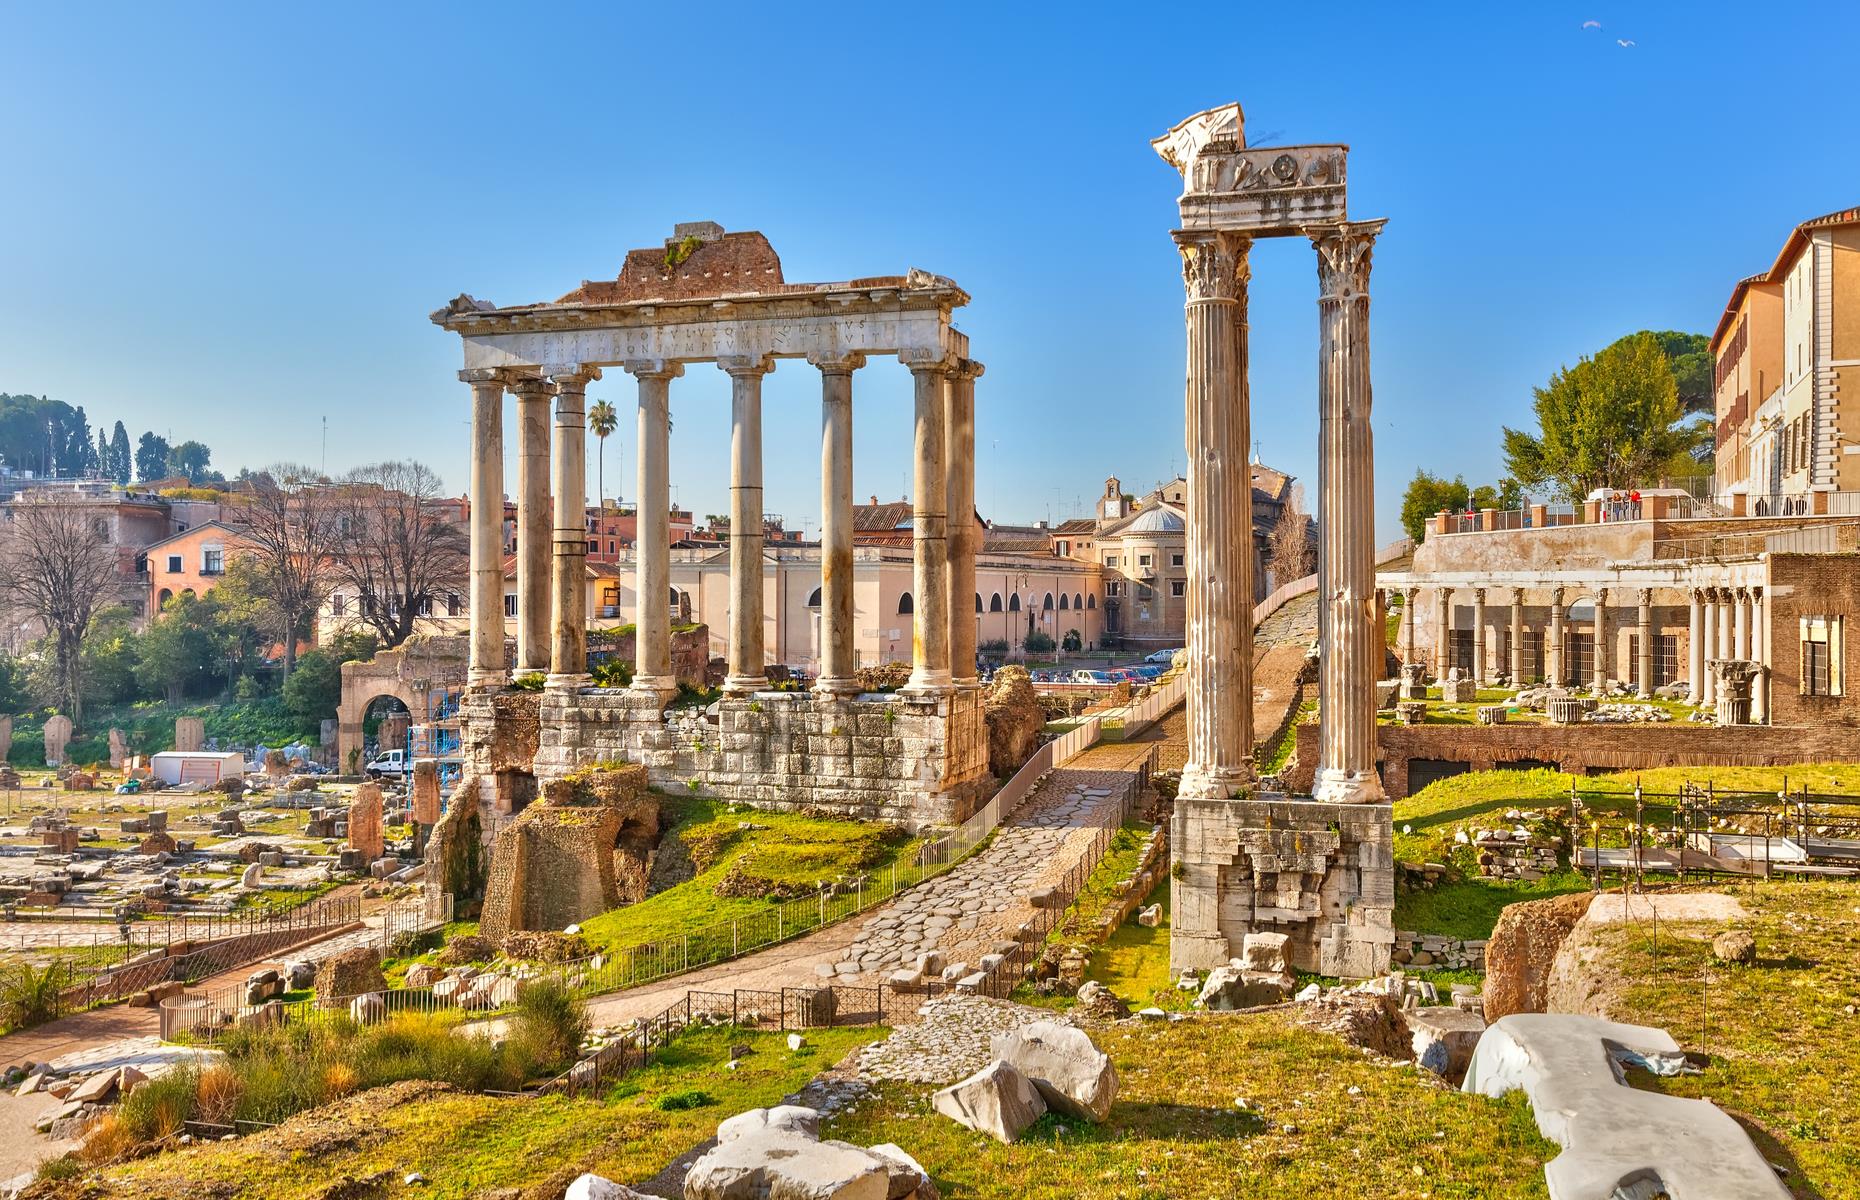 Must-visit destinations for lovers of ancient history